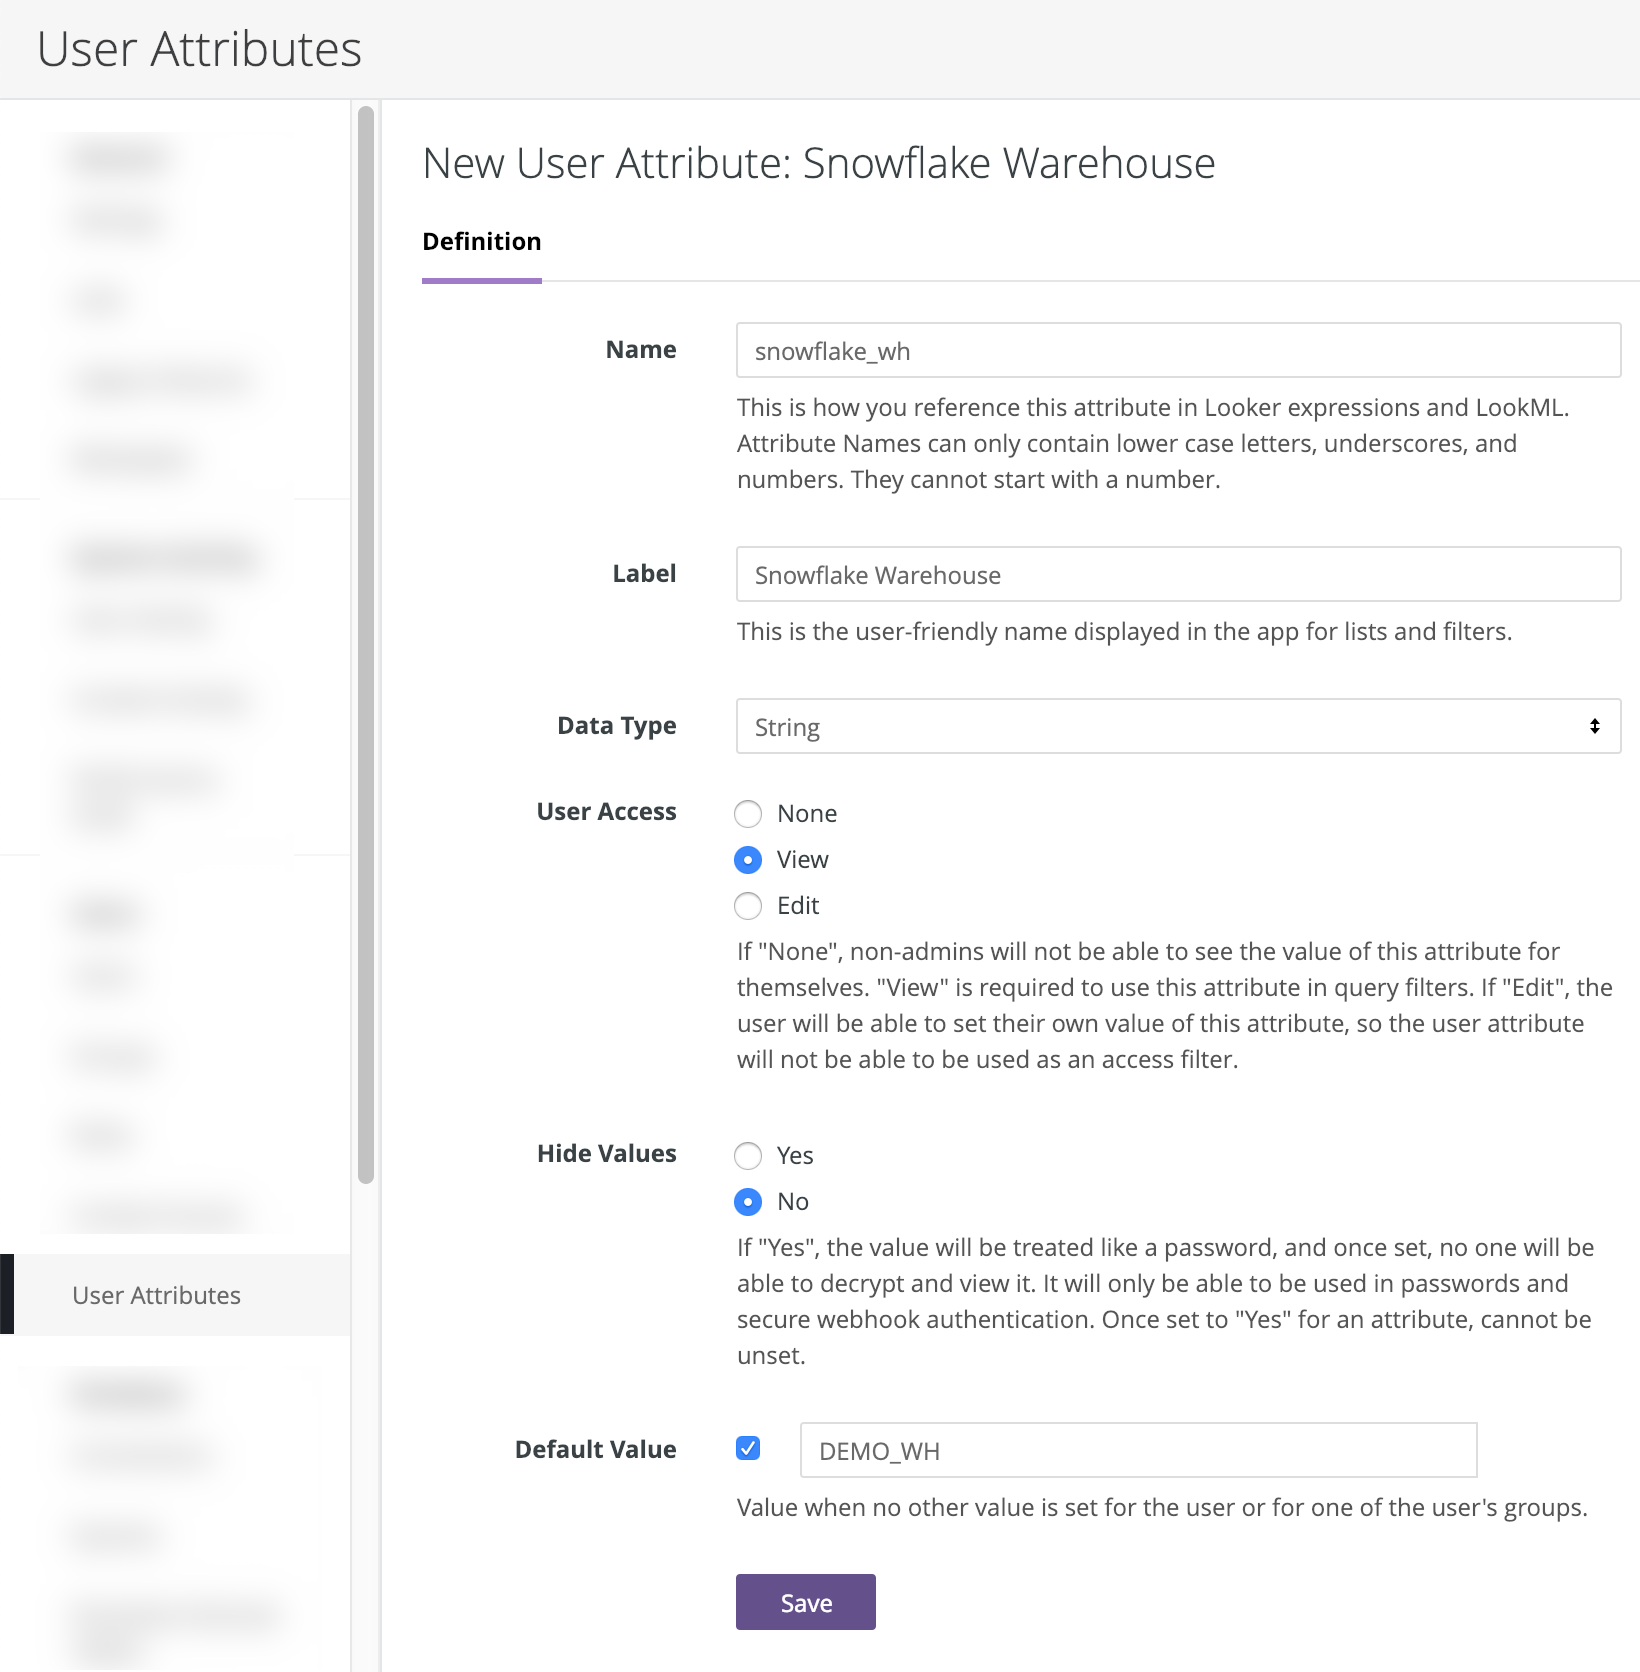 The User Attributes page in Looker, showing the Snowflake warehouse user attribute.